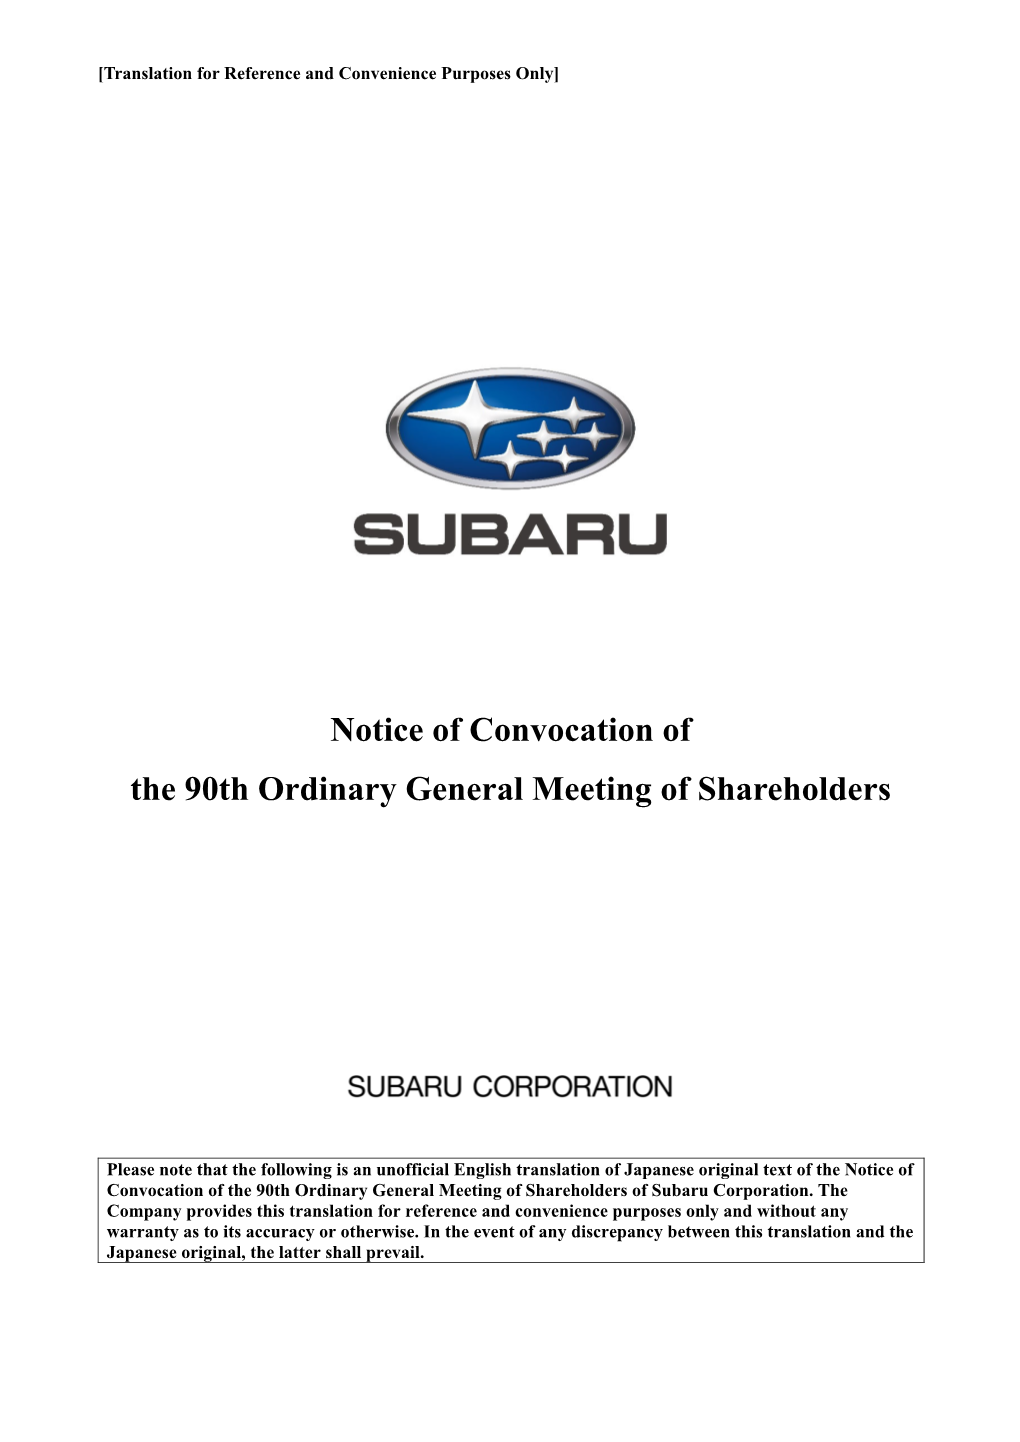 Notice of Convocation of the 90Th Ordinary General Meeting of Shareholders